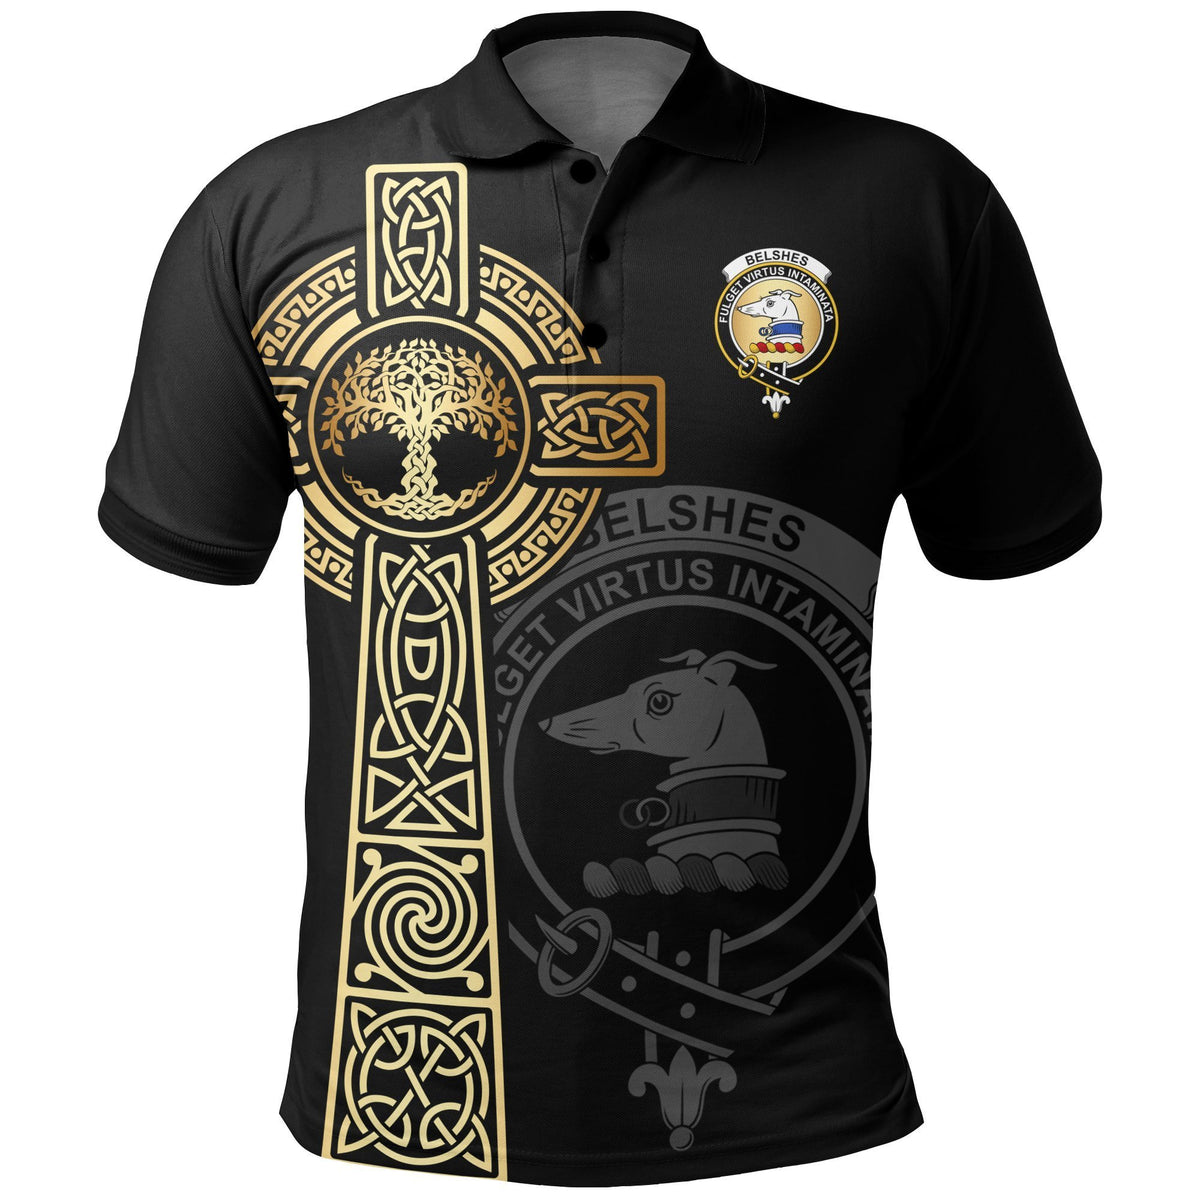 Belshes (or Belsches) Clan Unisex Polo Shirt - Celtic Tree Of Life